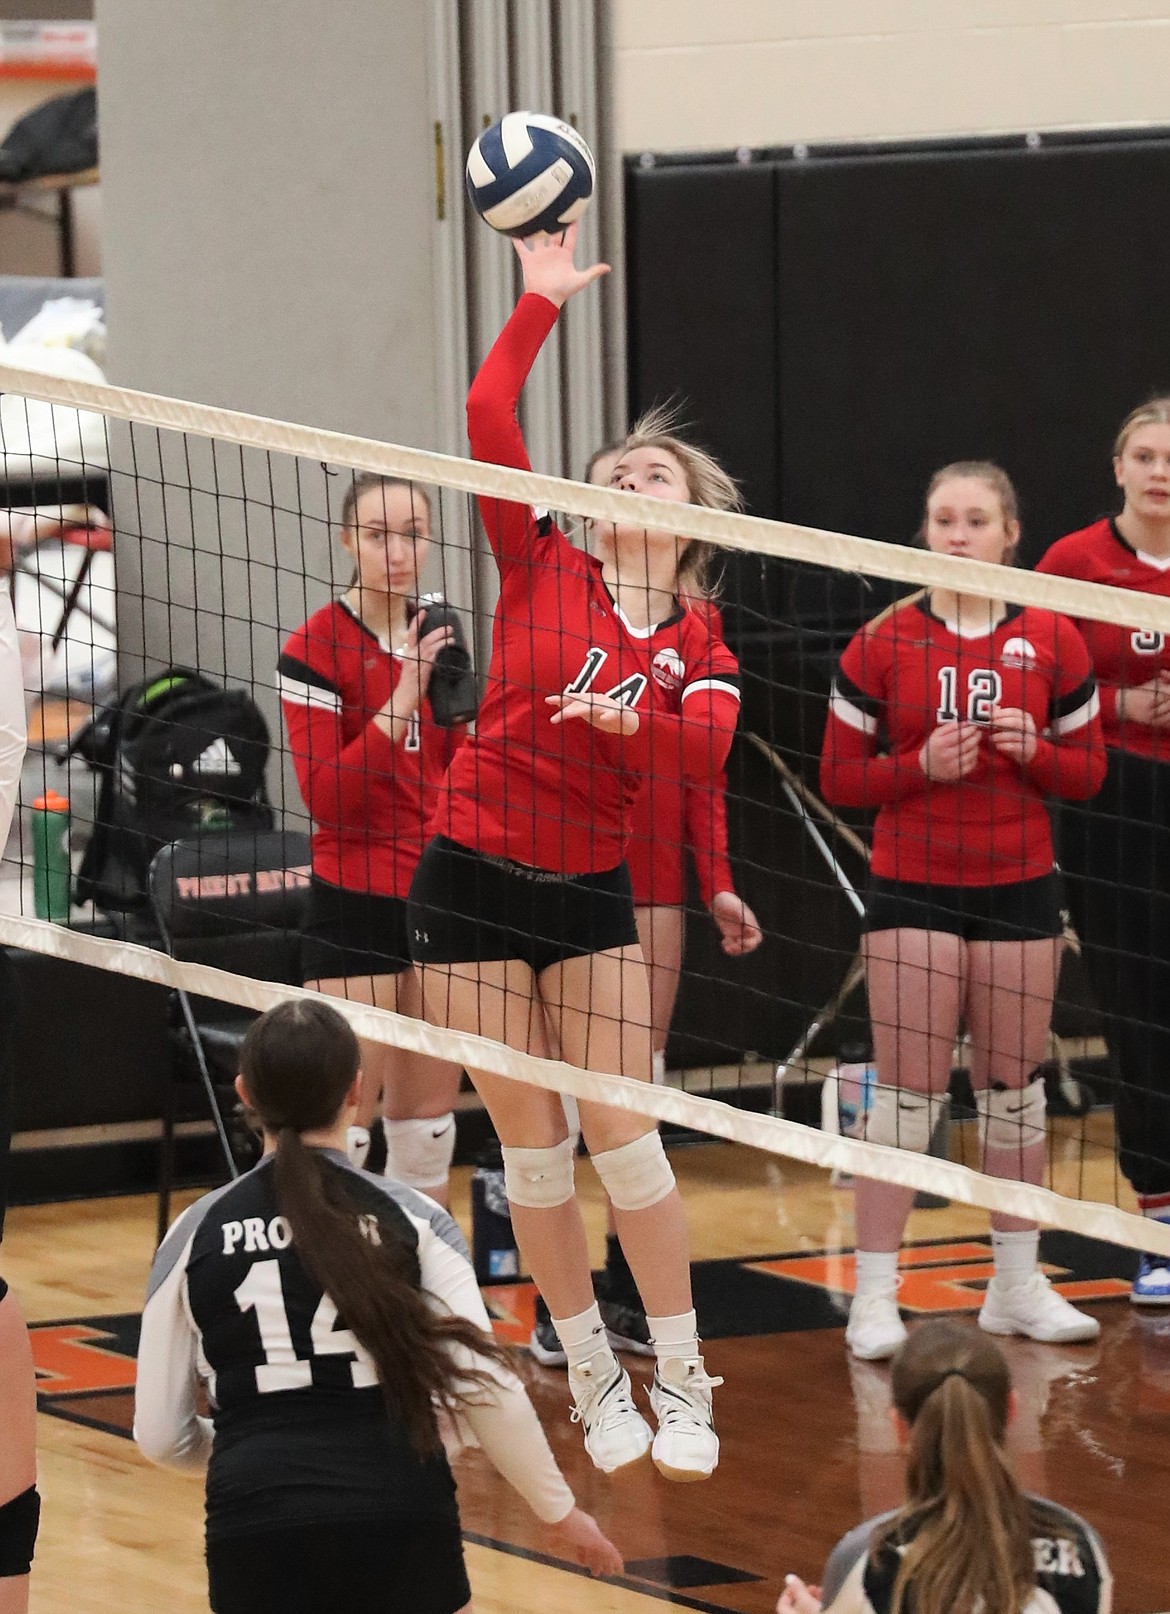 Antonella Peitz, a member of the U16 North Idaho Volleyball Club, goes up for a kill on Sunday.